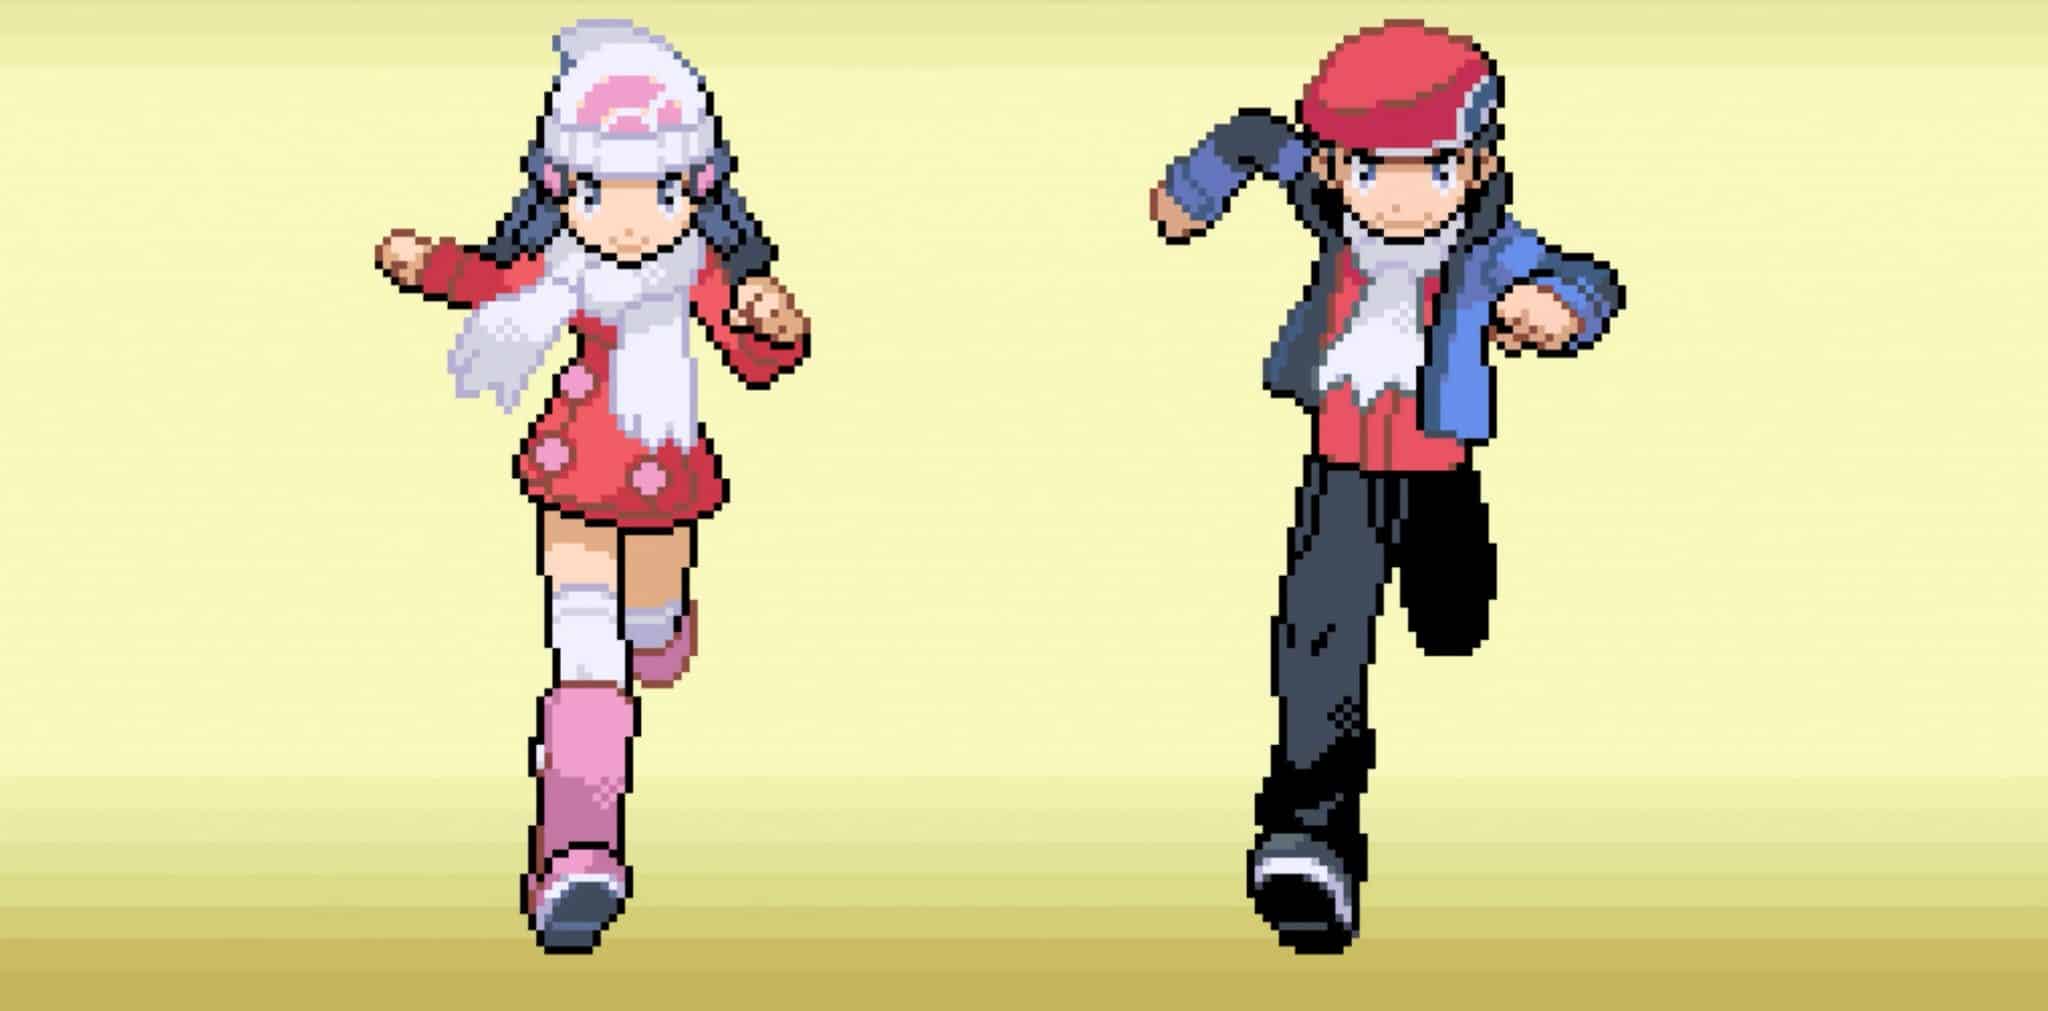 Pokemon Brilliant Diamond & Shining Pearl is ditching a classic feature -  Dexerto